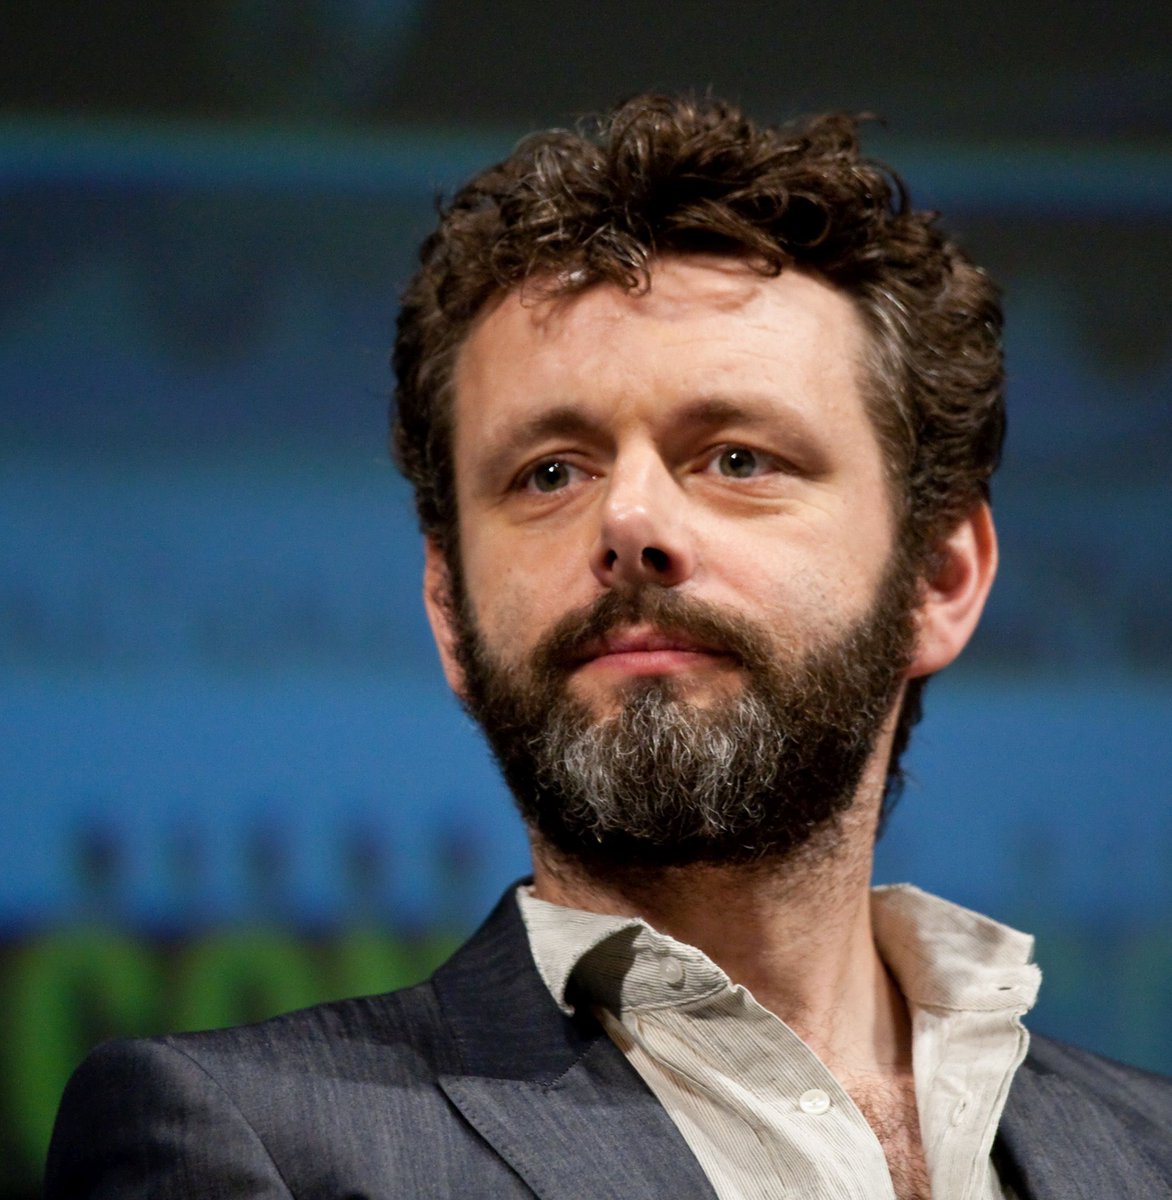 Michael at the 'Tron: Legacy' panel during SDCC, 2010  http://michael-sheen.com/photos/thumbnails.php?album=401